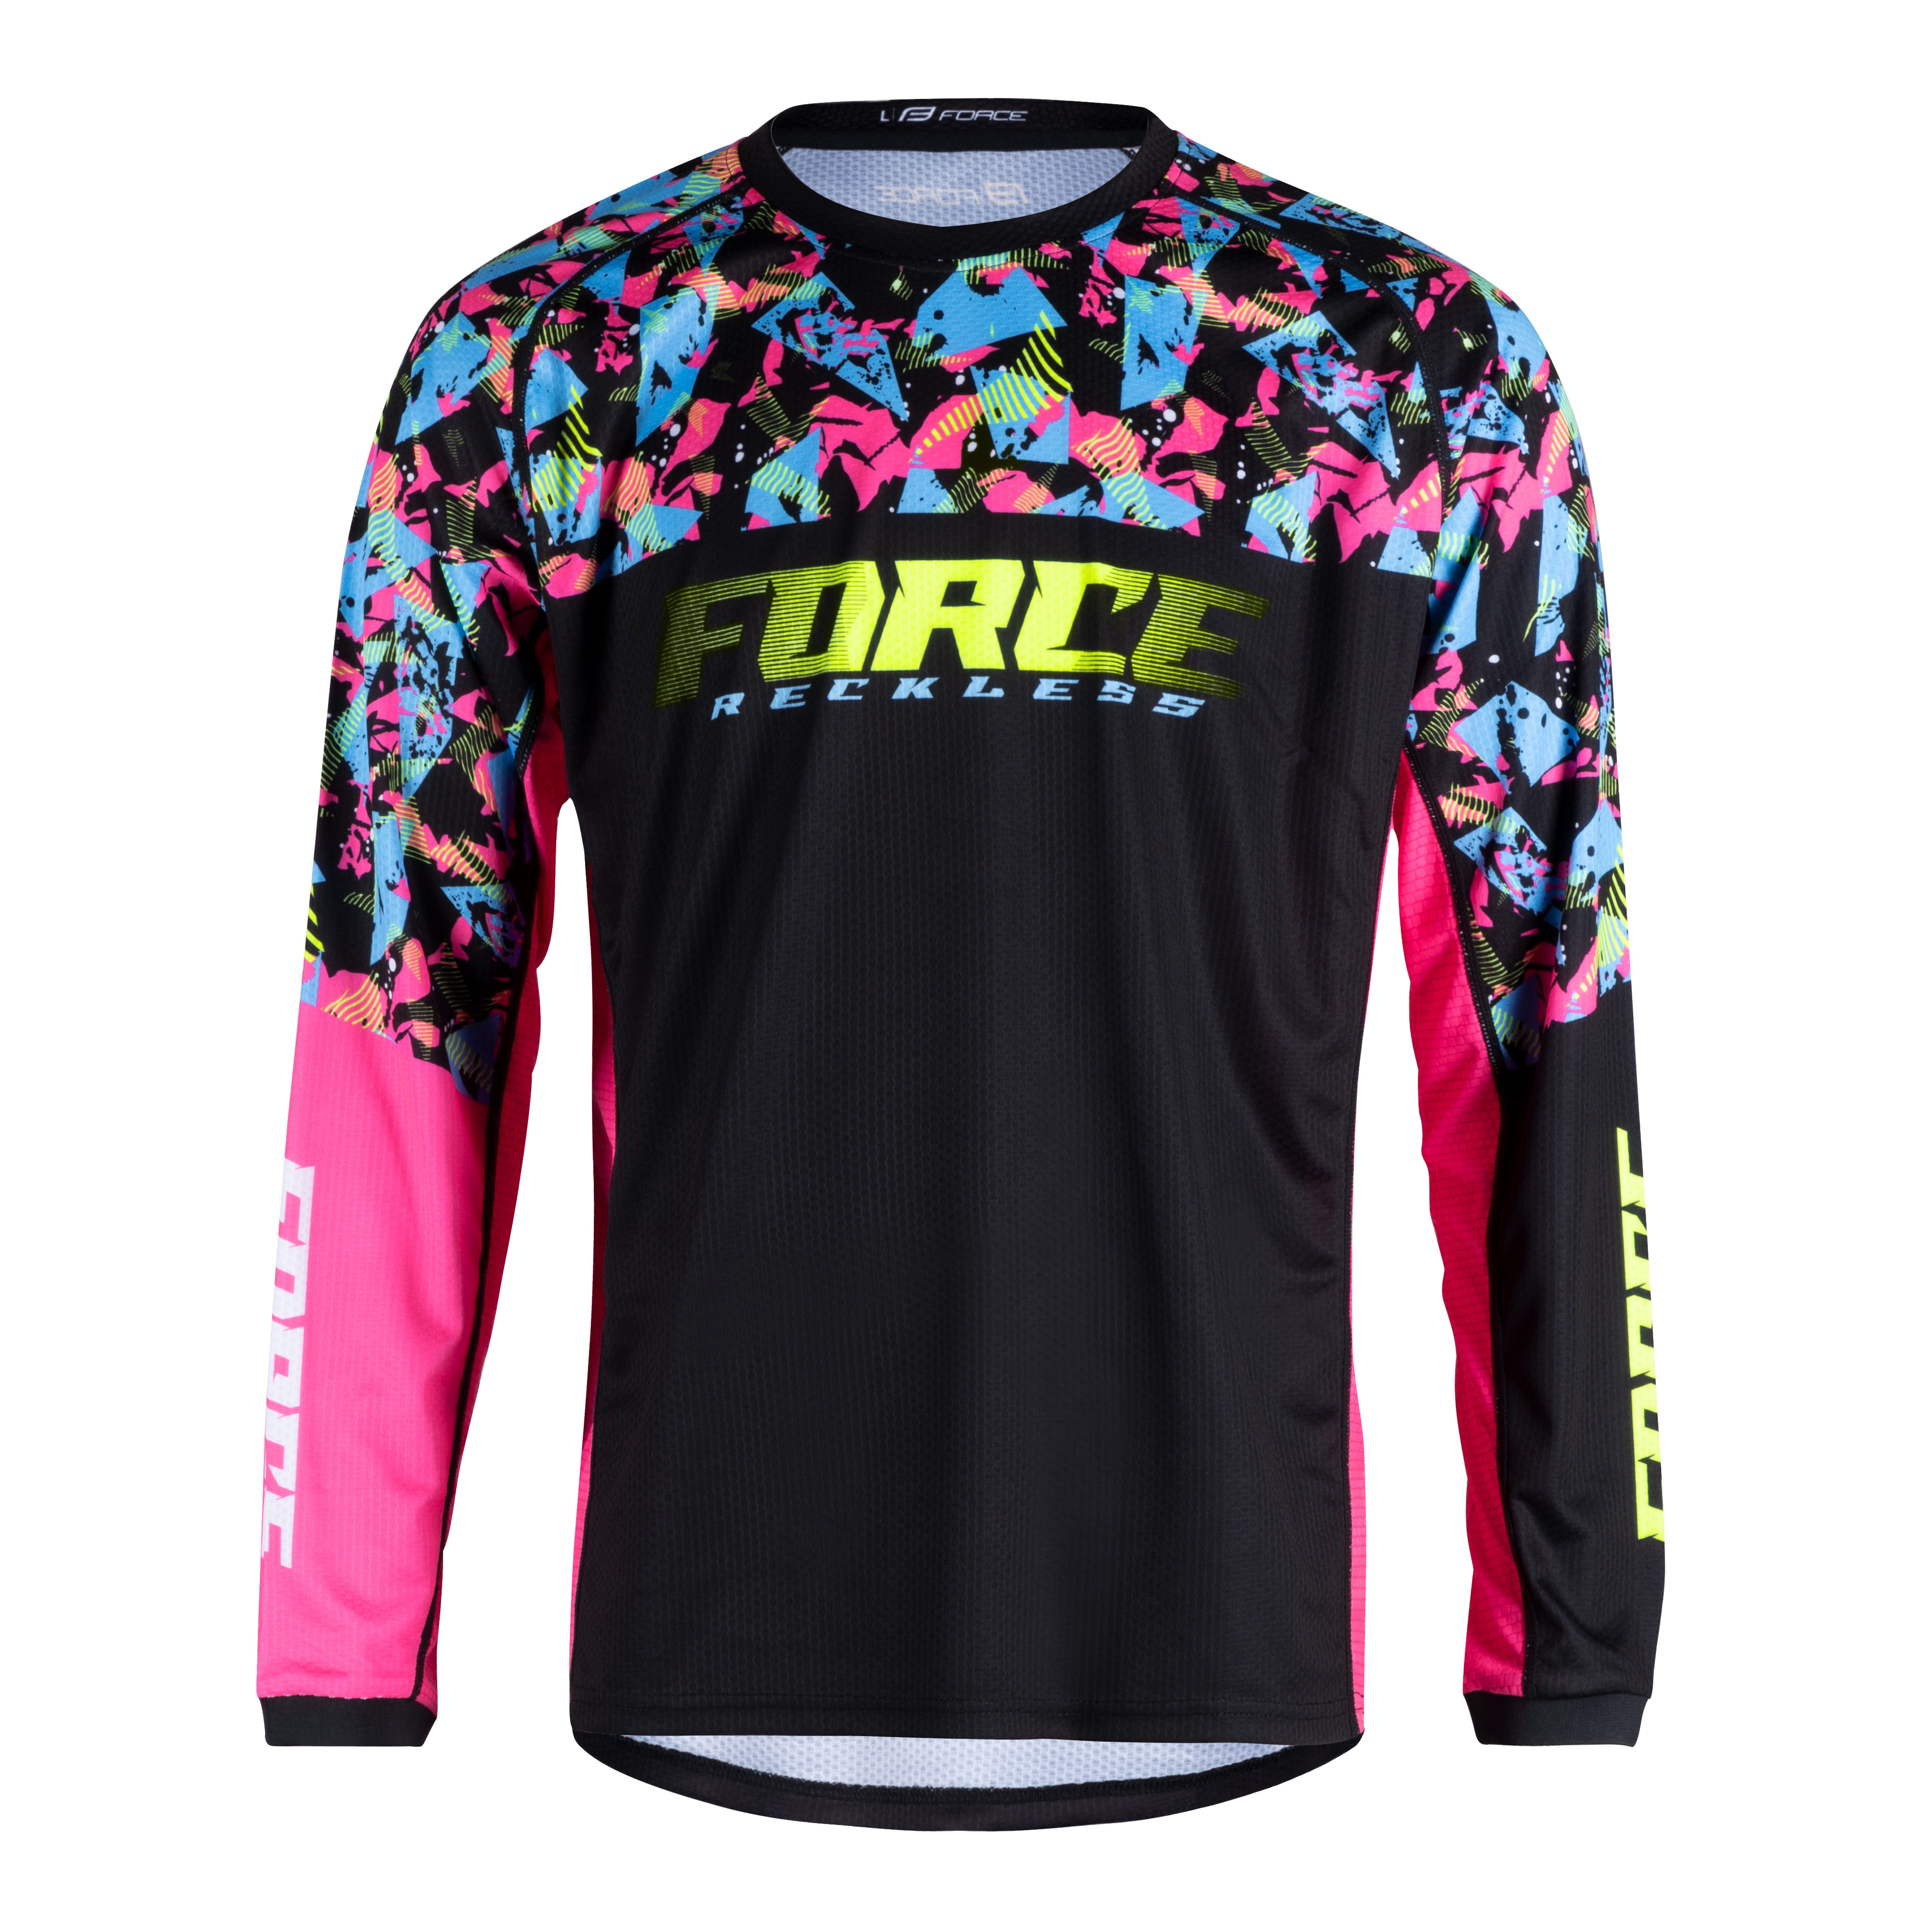 dres F RECKLESS dl. rukv, erno-rovo-fluo XL